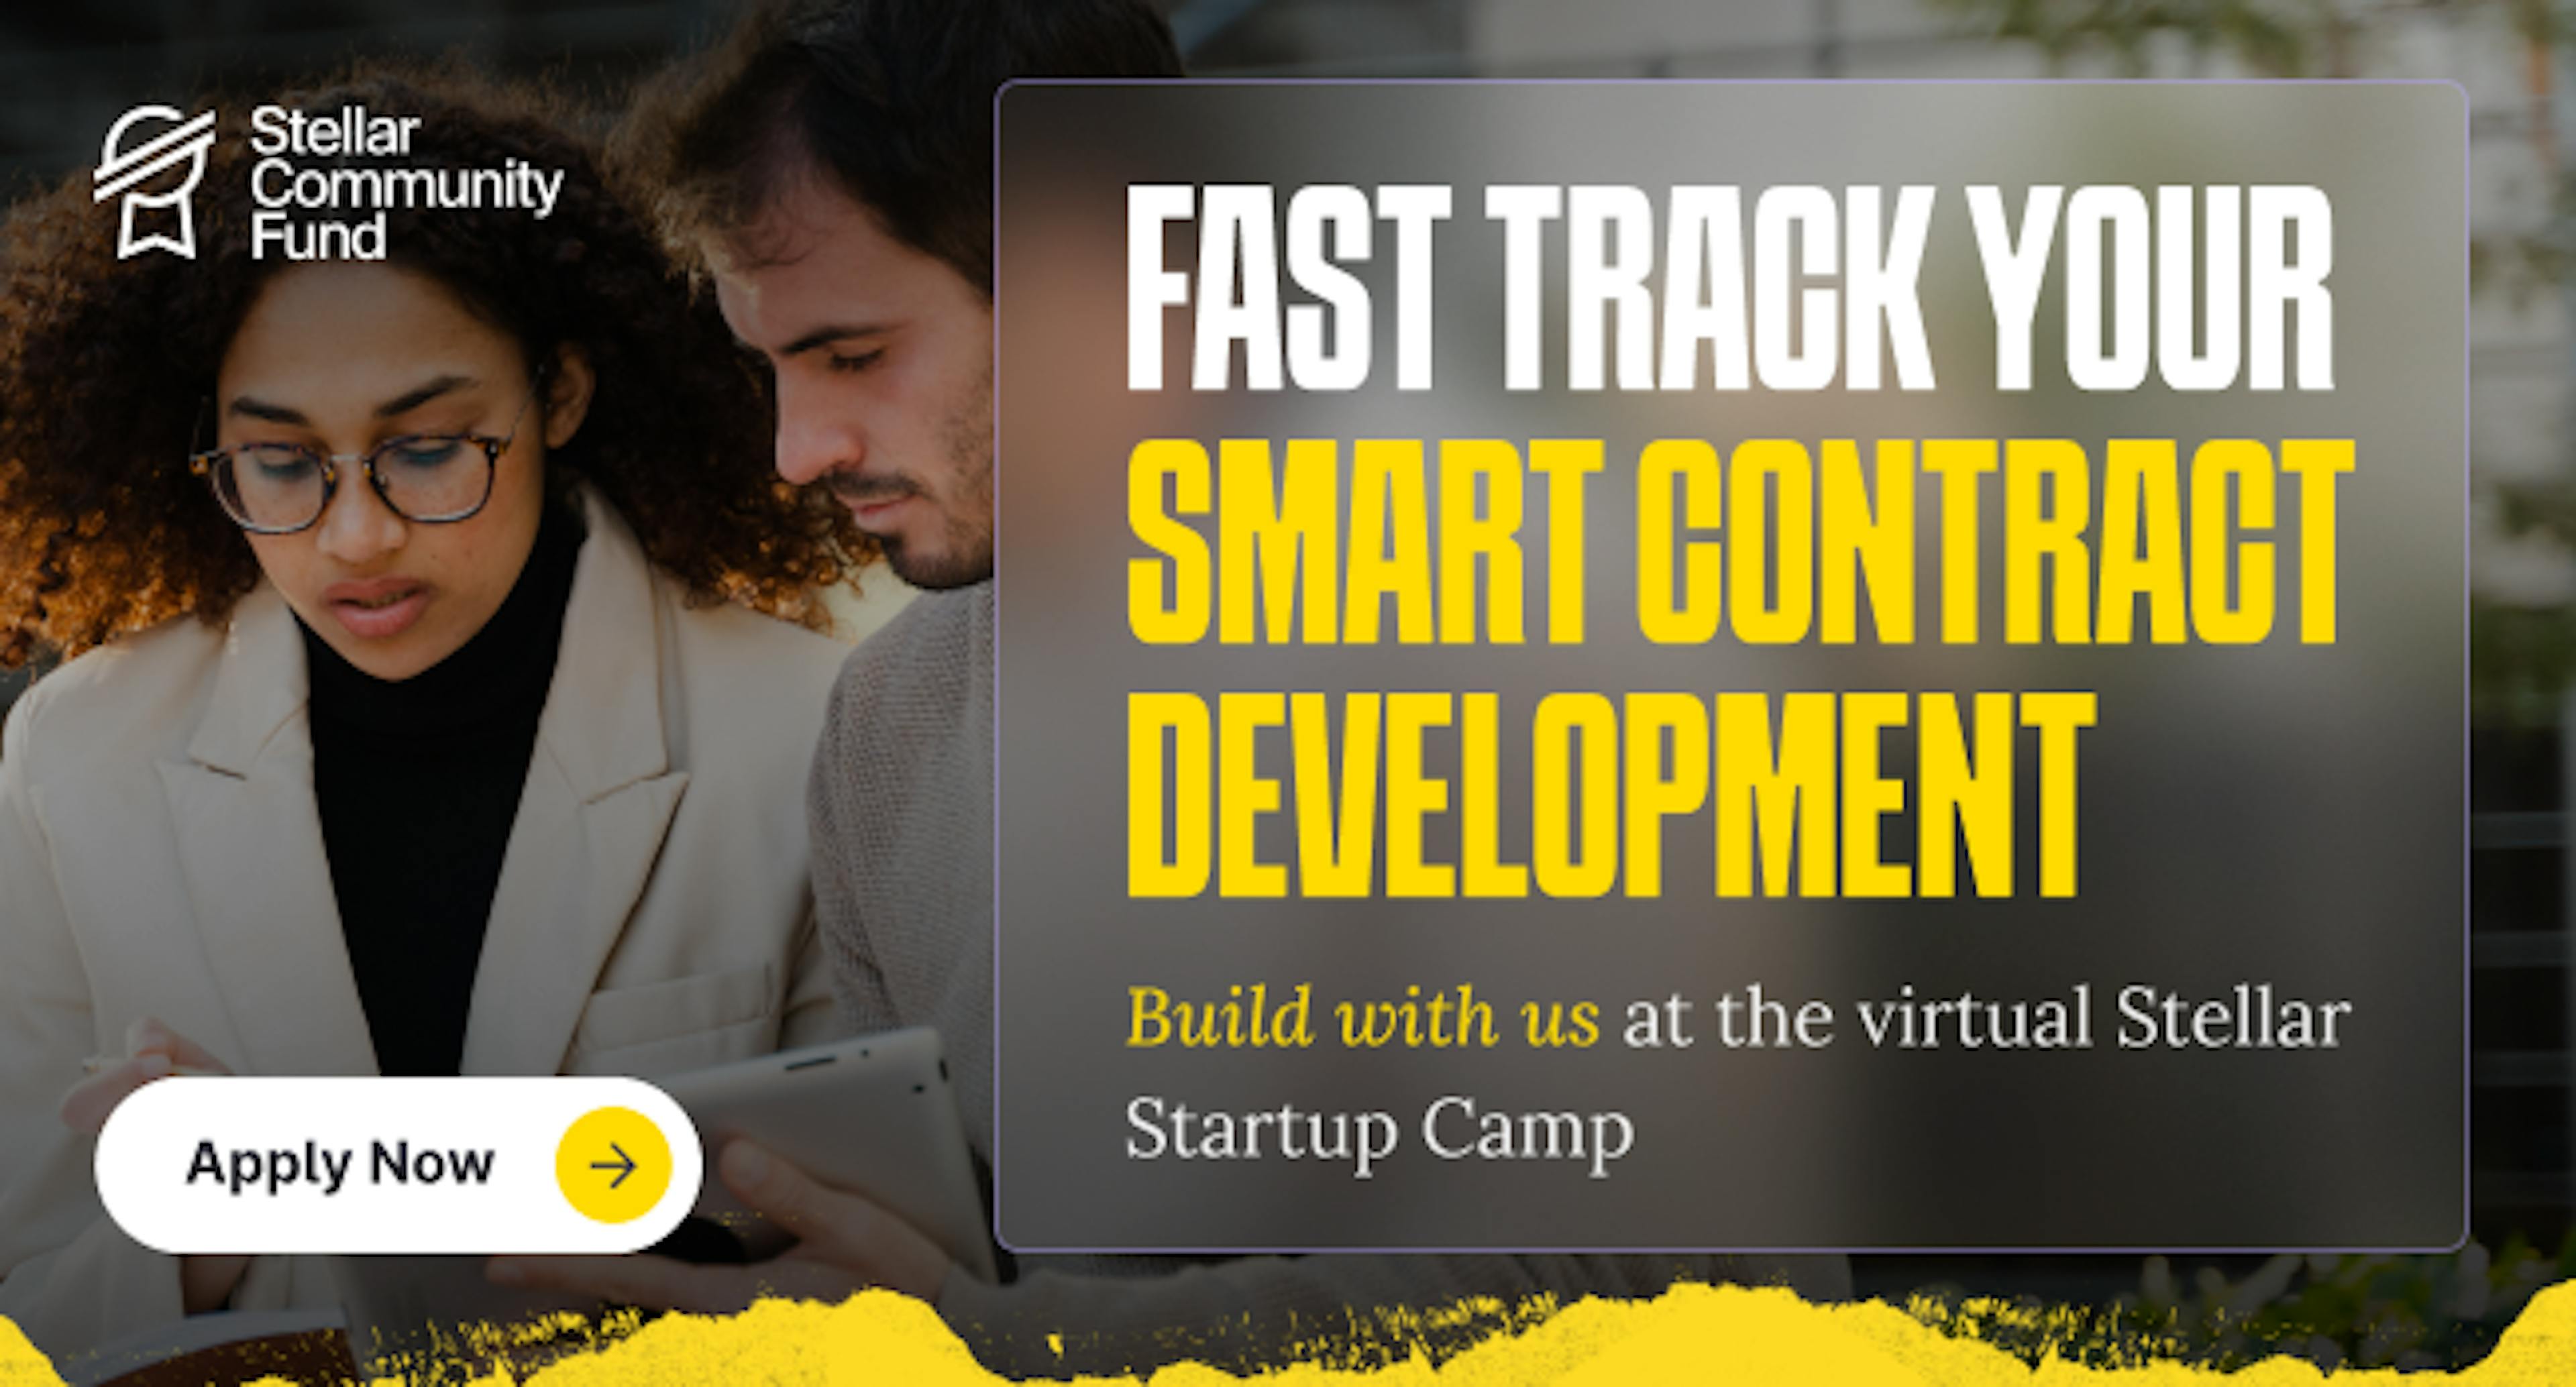 /Launch your smart contract idea in just 4 days feature image